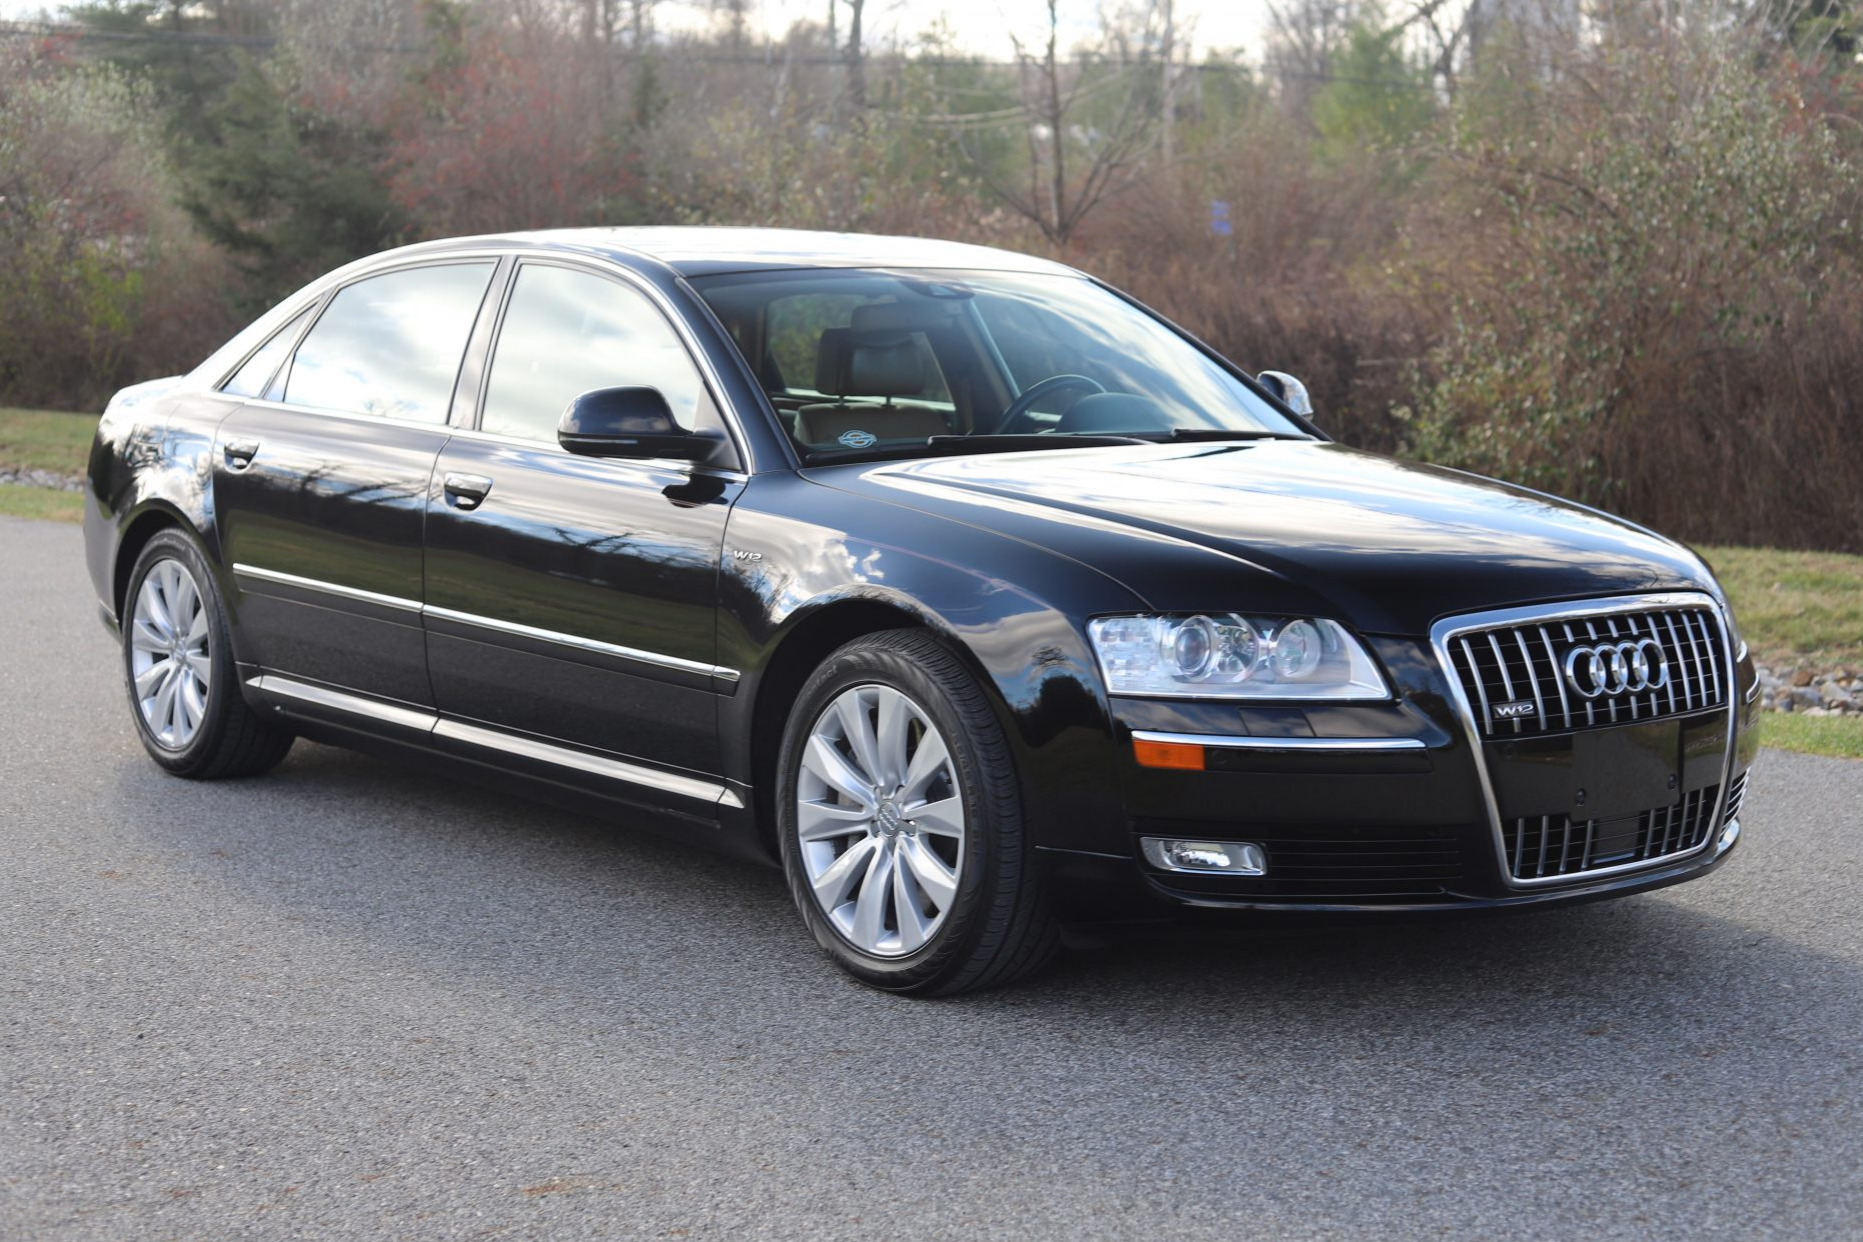 35k-Mile 2009 Audi A8L W12 Quattro for sale on BaT Auctions - sold for  $31,000 on November 30, 2020 (Lot #39,837) | Bring a Trailer